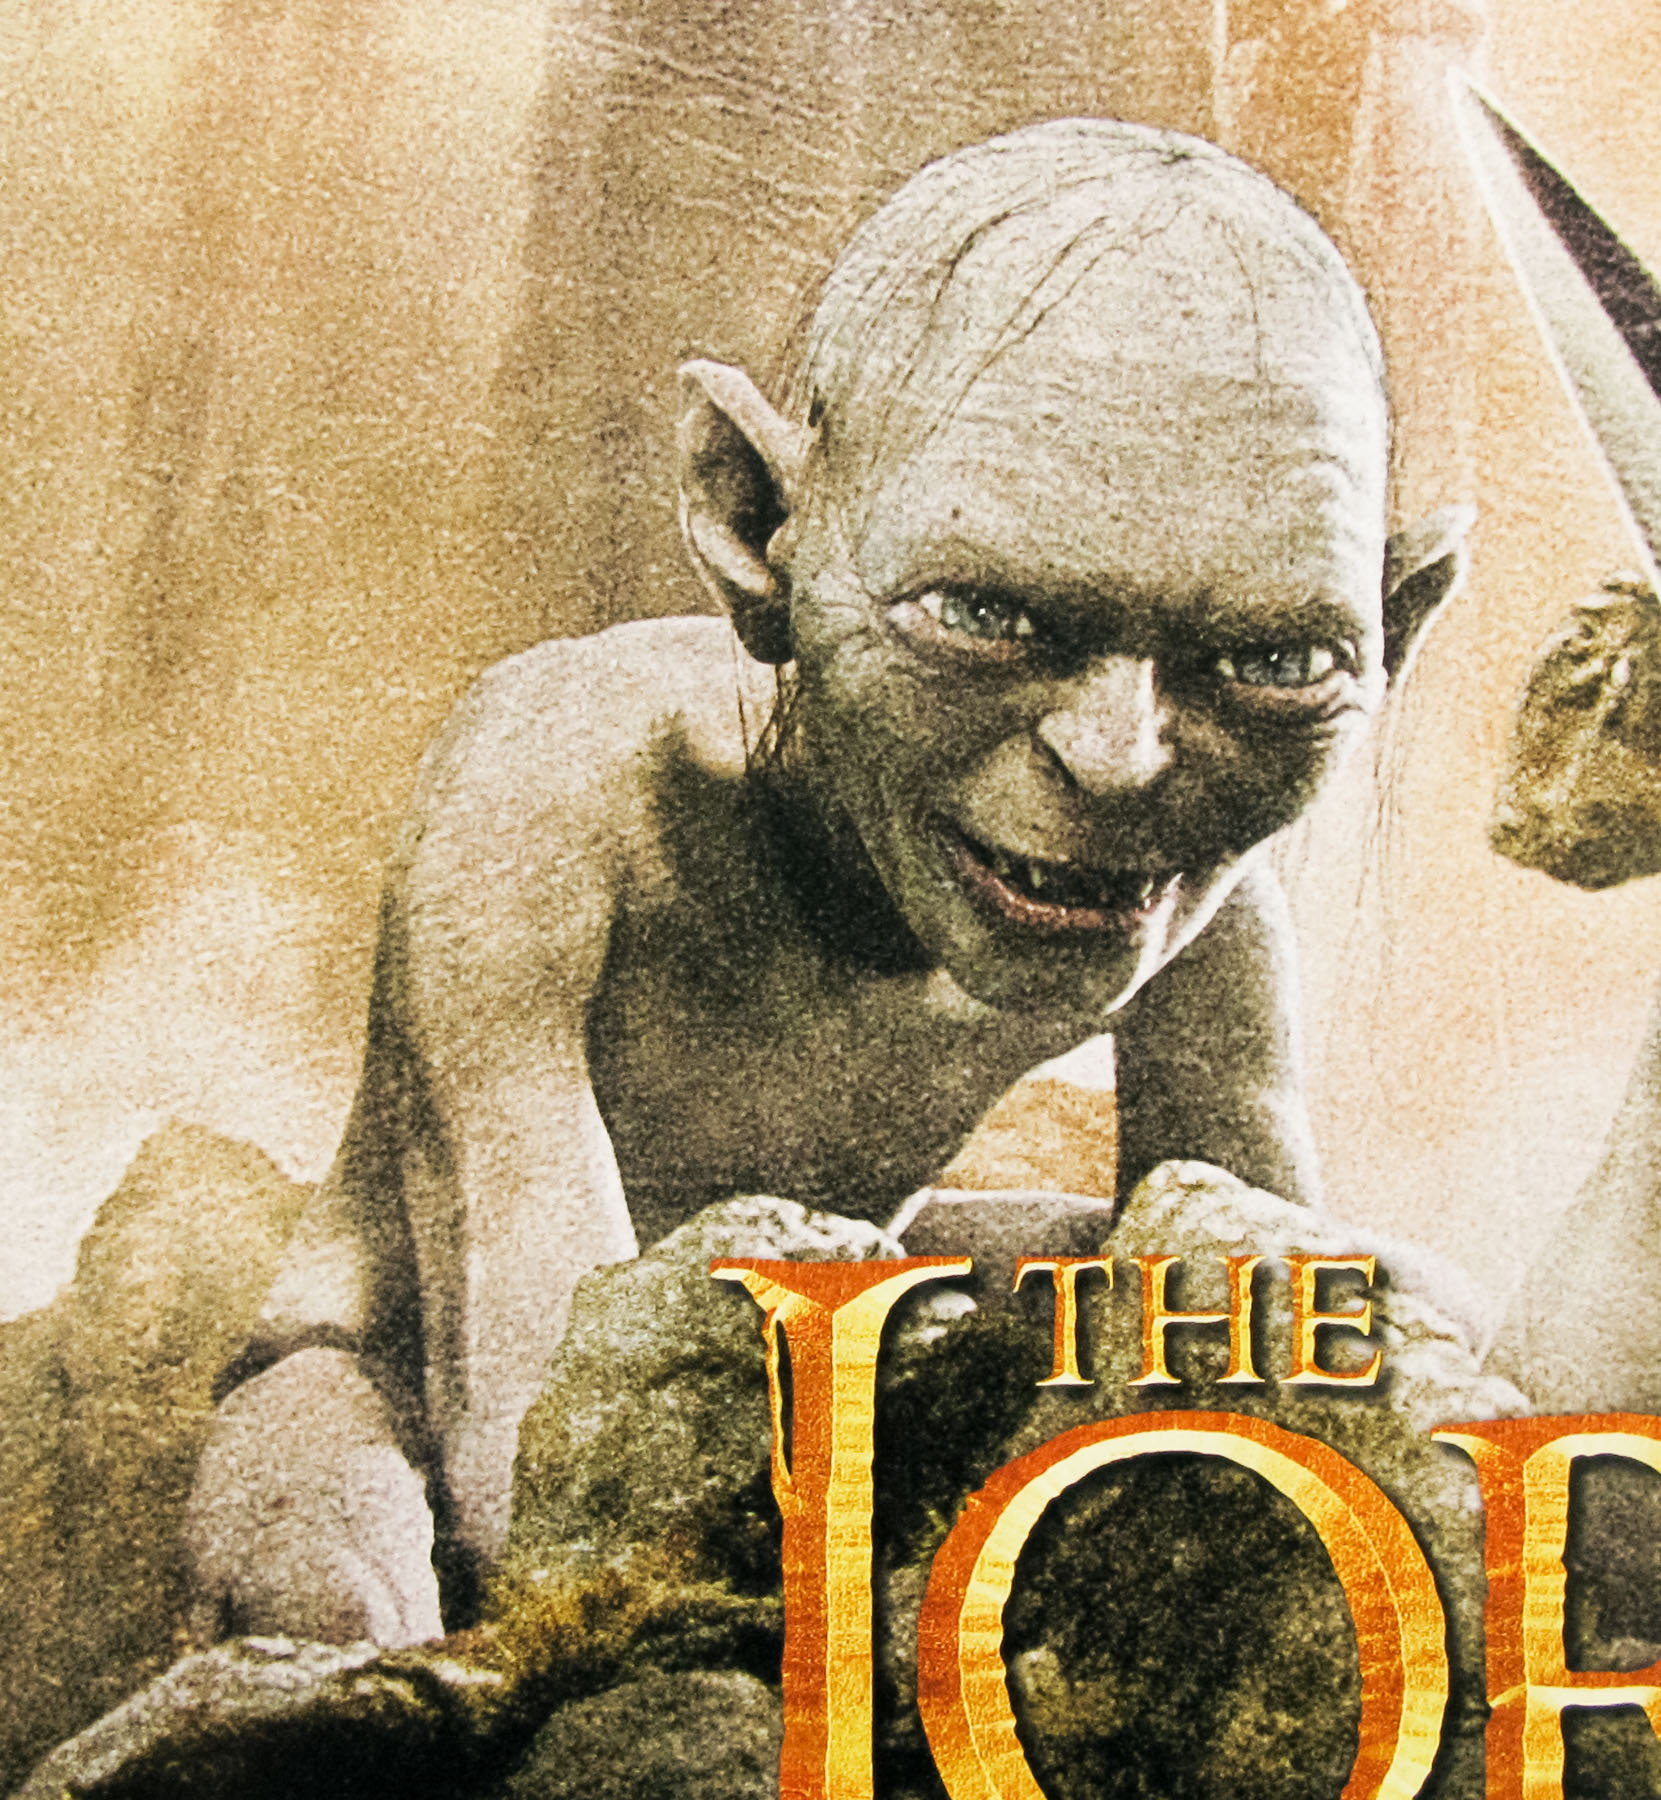 The Lord of the Rings - The Return of the King One-Sheet Movie